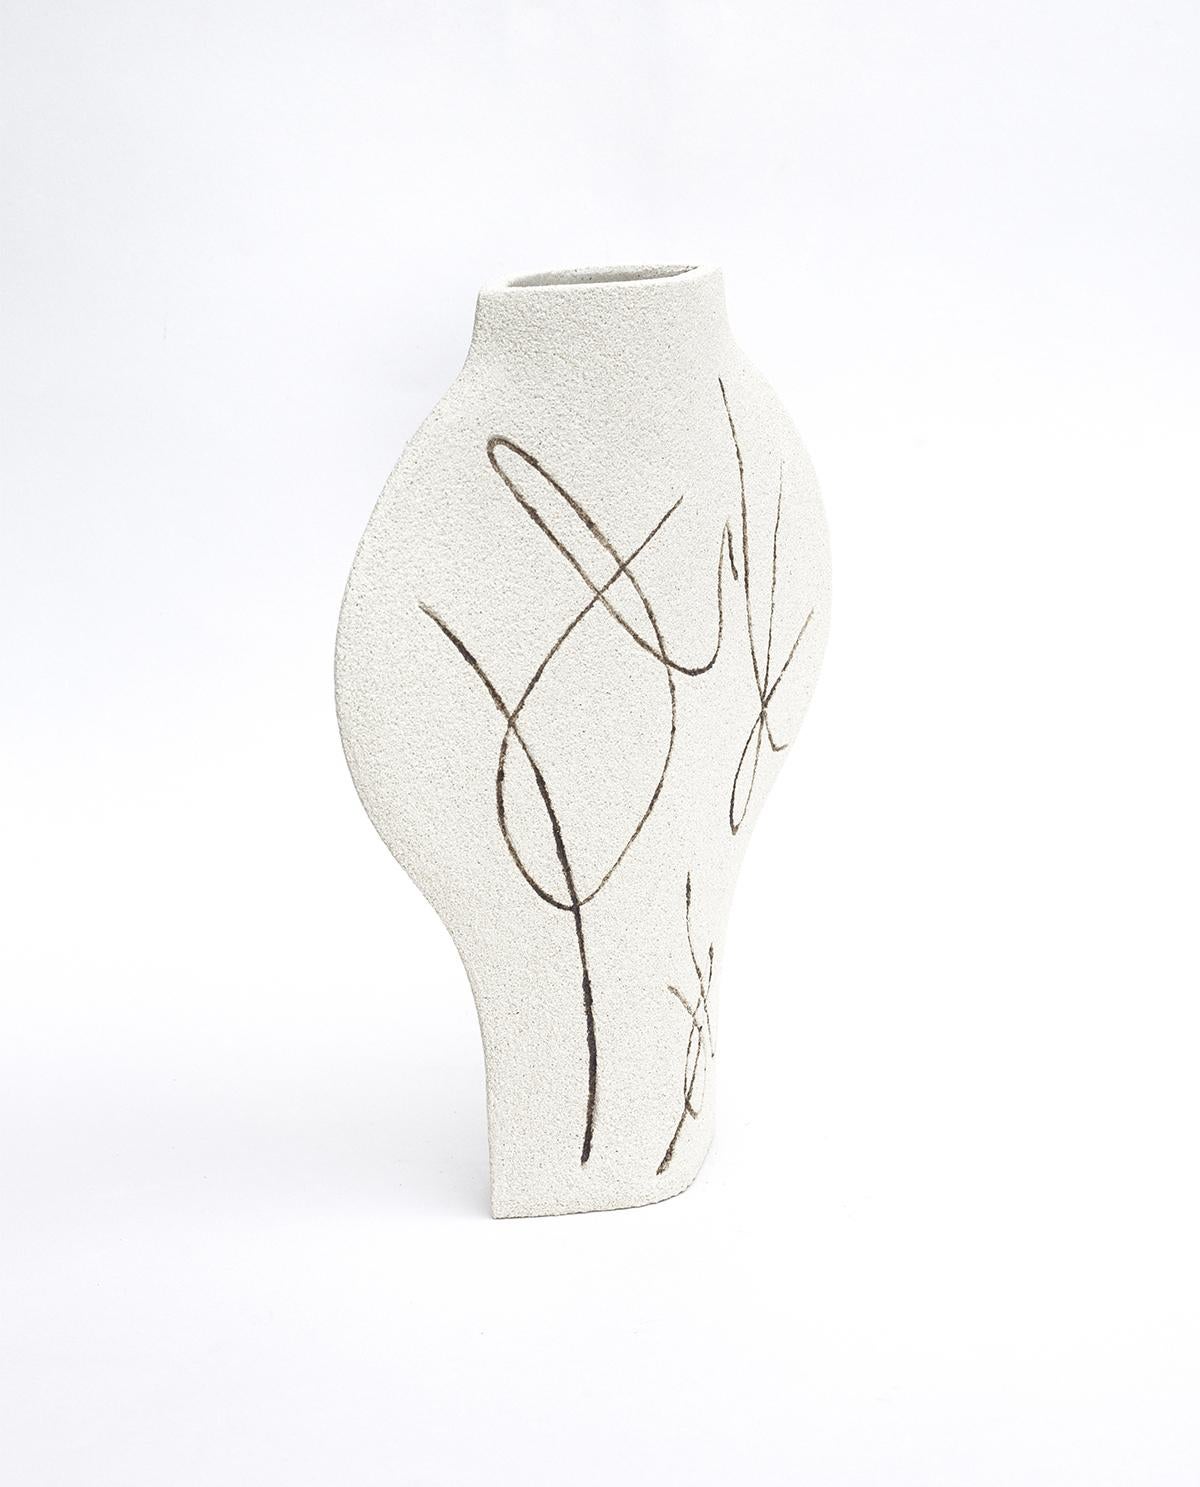 ‘Dal Lines’ Ceramic vase 

This vase is part of a new series inspired by iconic Art (and more precisely paintings) movements. Here is our DAL model with motifs based on abstract illustrations. They are hand-carved to the vase before its first